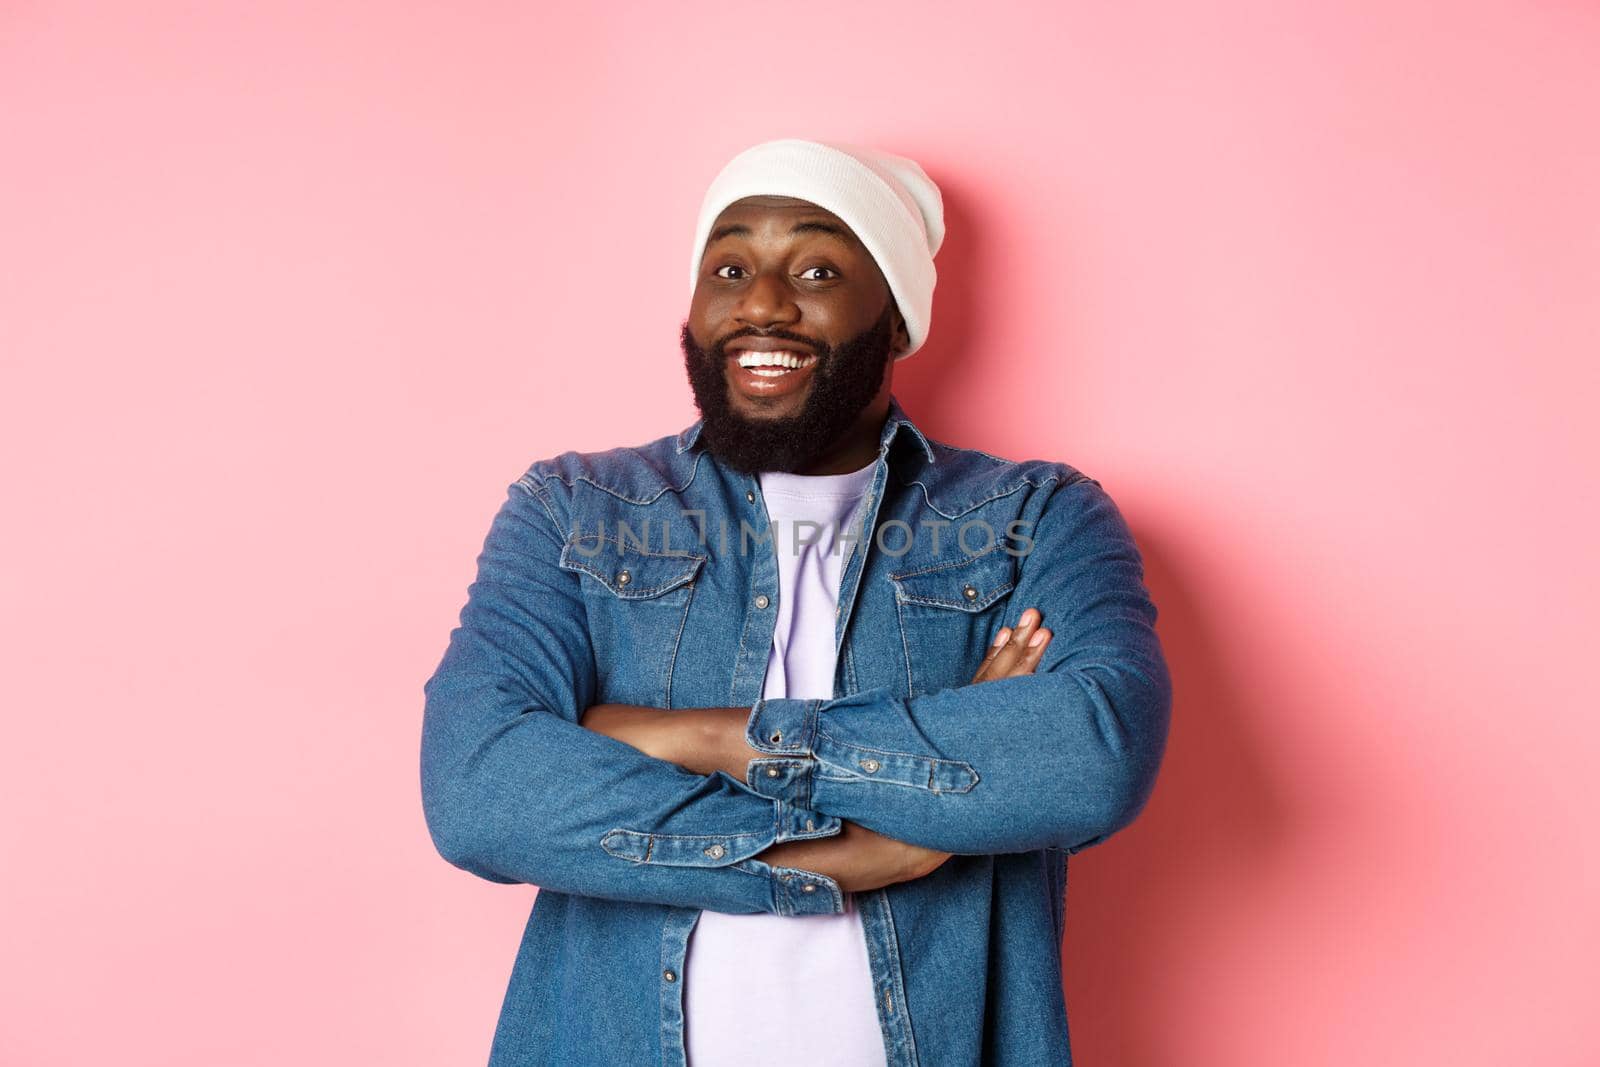 Happy Black man with beard, wearing beanie and denim shirt, looking intrigued and amused at camera, smiling with arms crossed on chest, pink background.